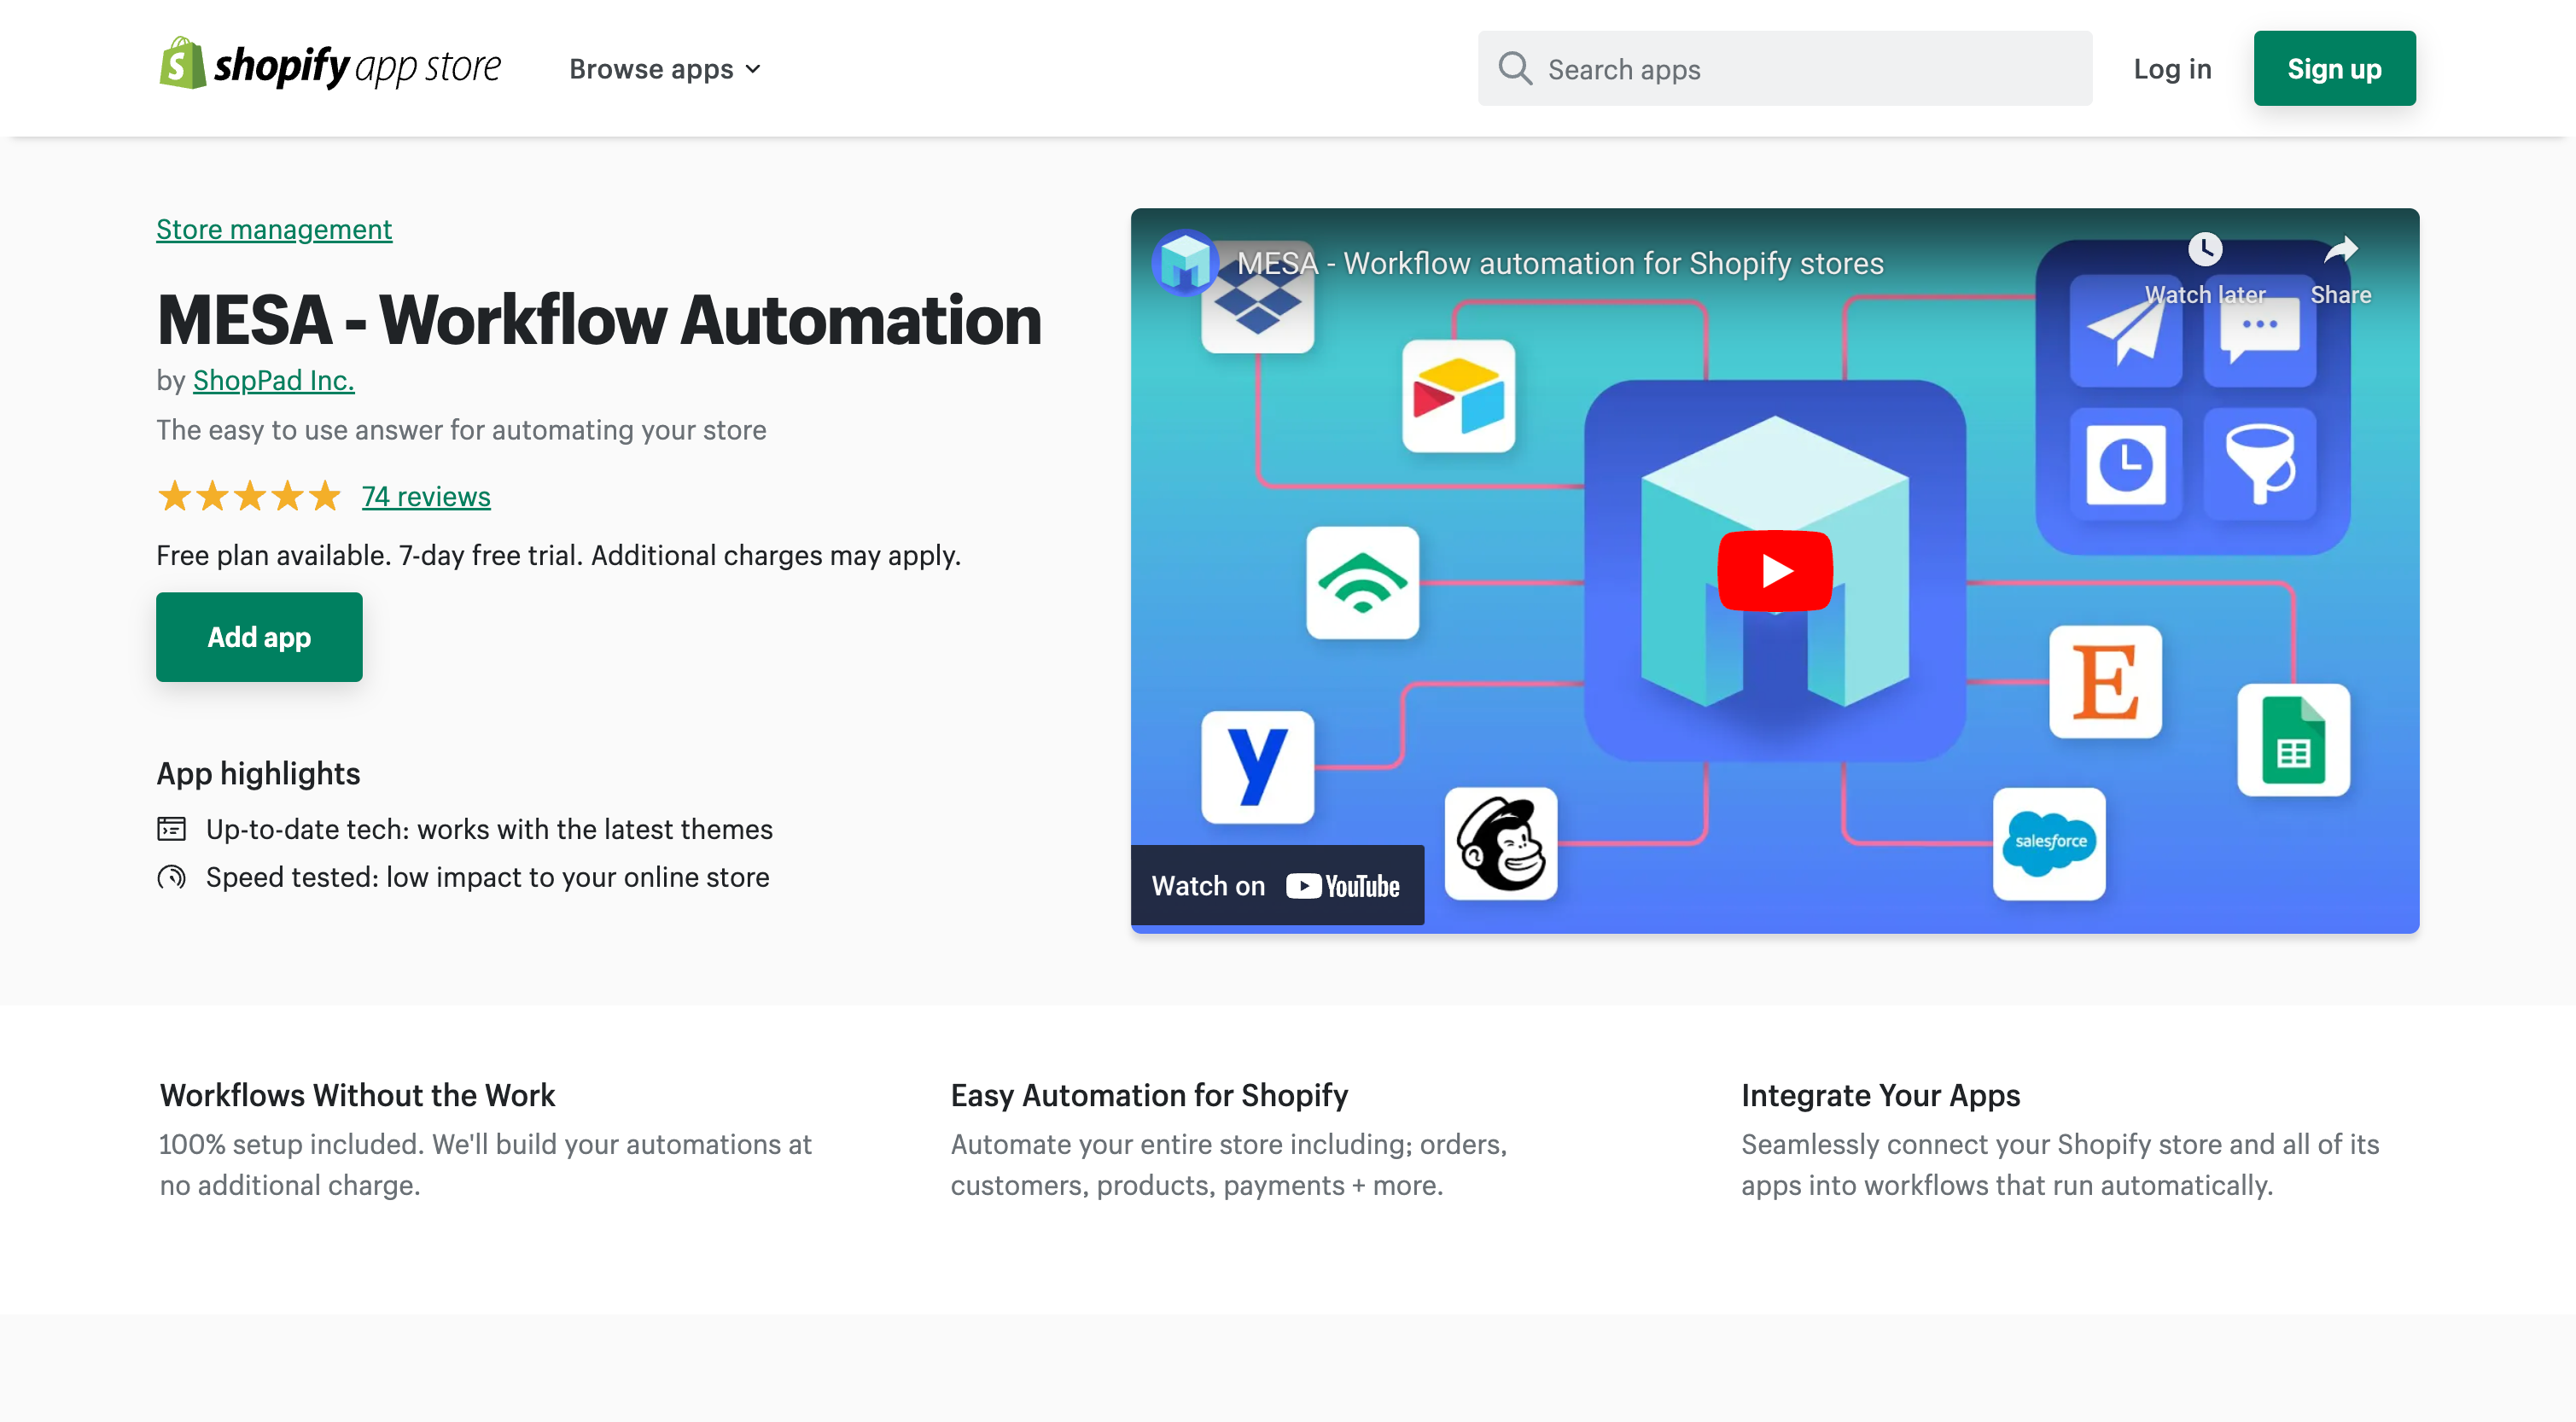 MESA ‑ Workflow Automation - The easy to use answer for automating your store | Shopify Apps Store